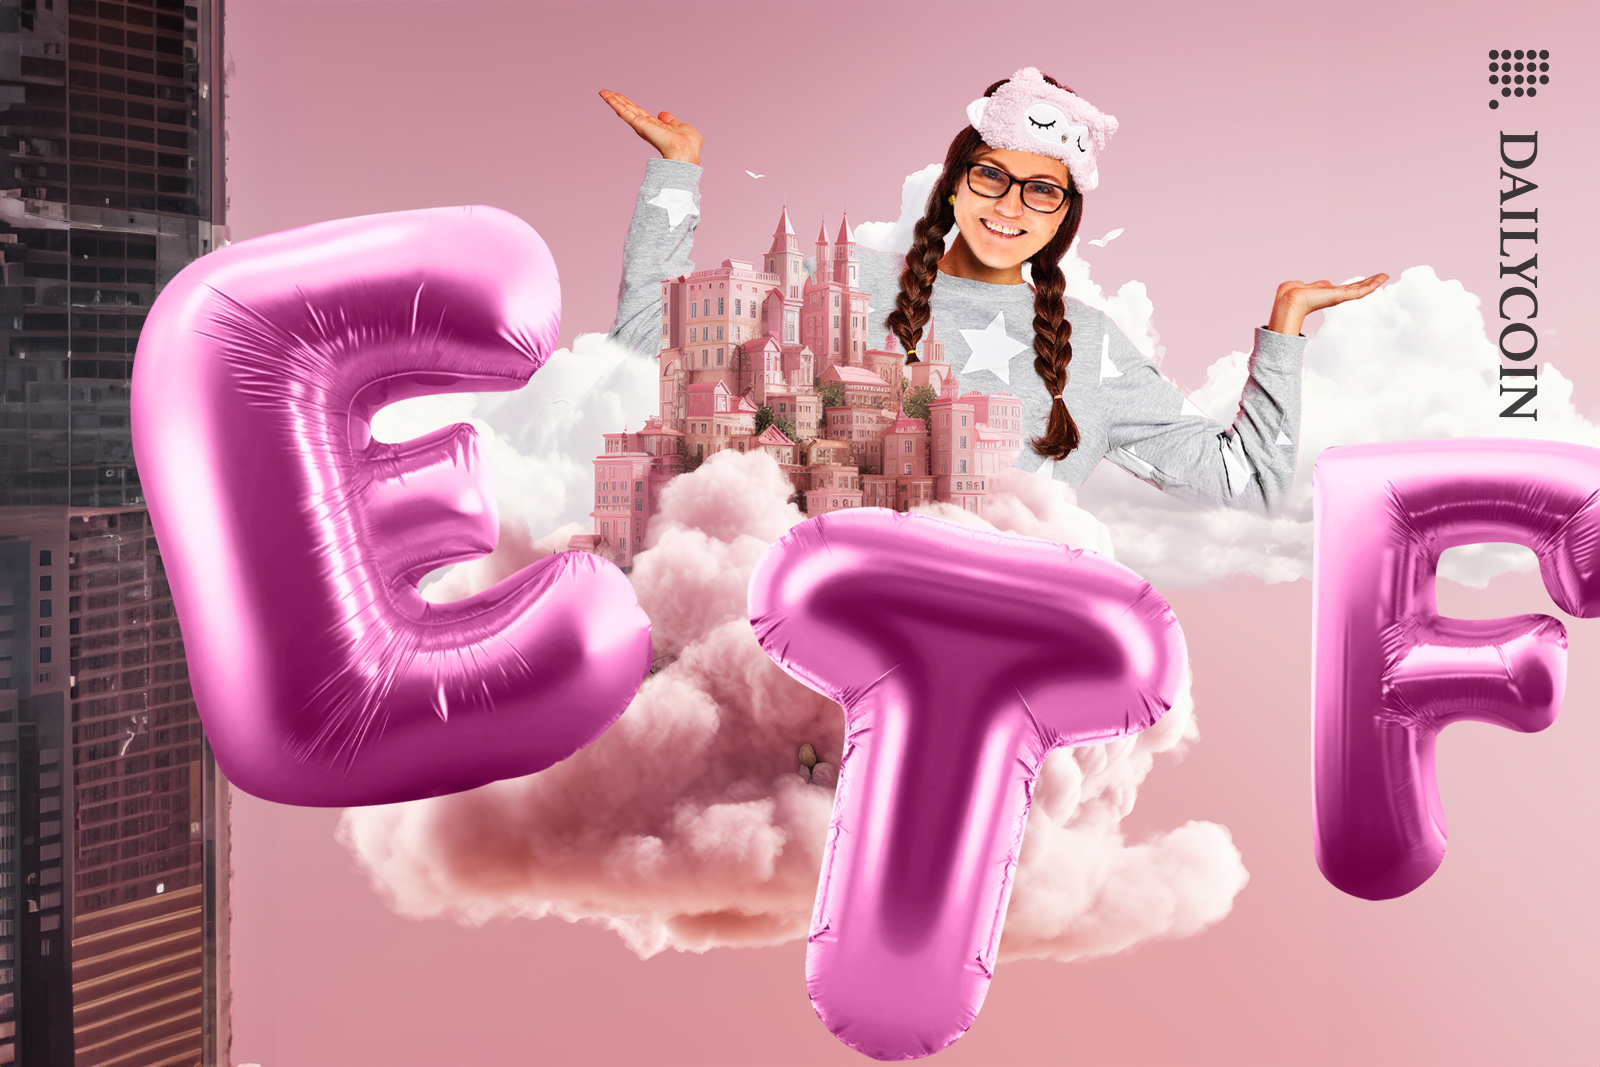 Cathie Woods in her magical empire with baloons of ETF and pink castle on a cloud.